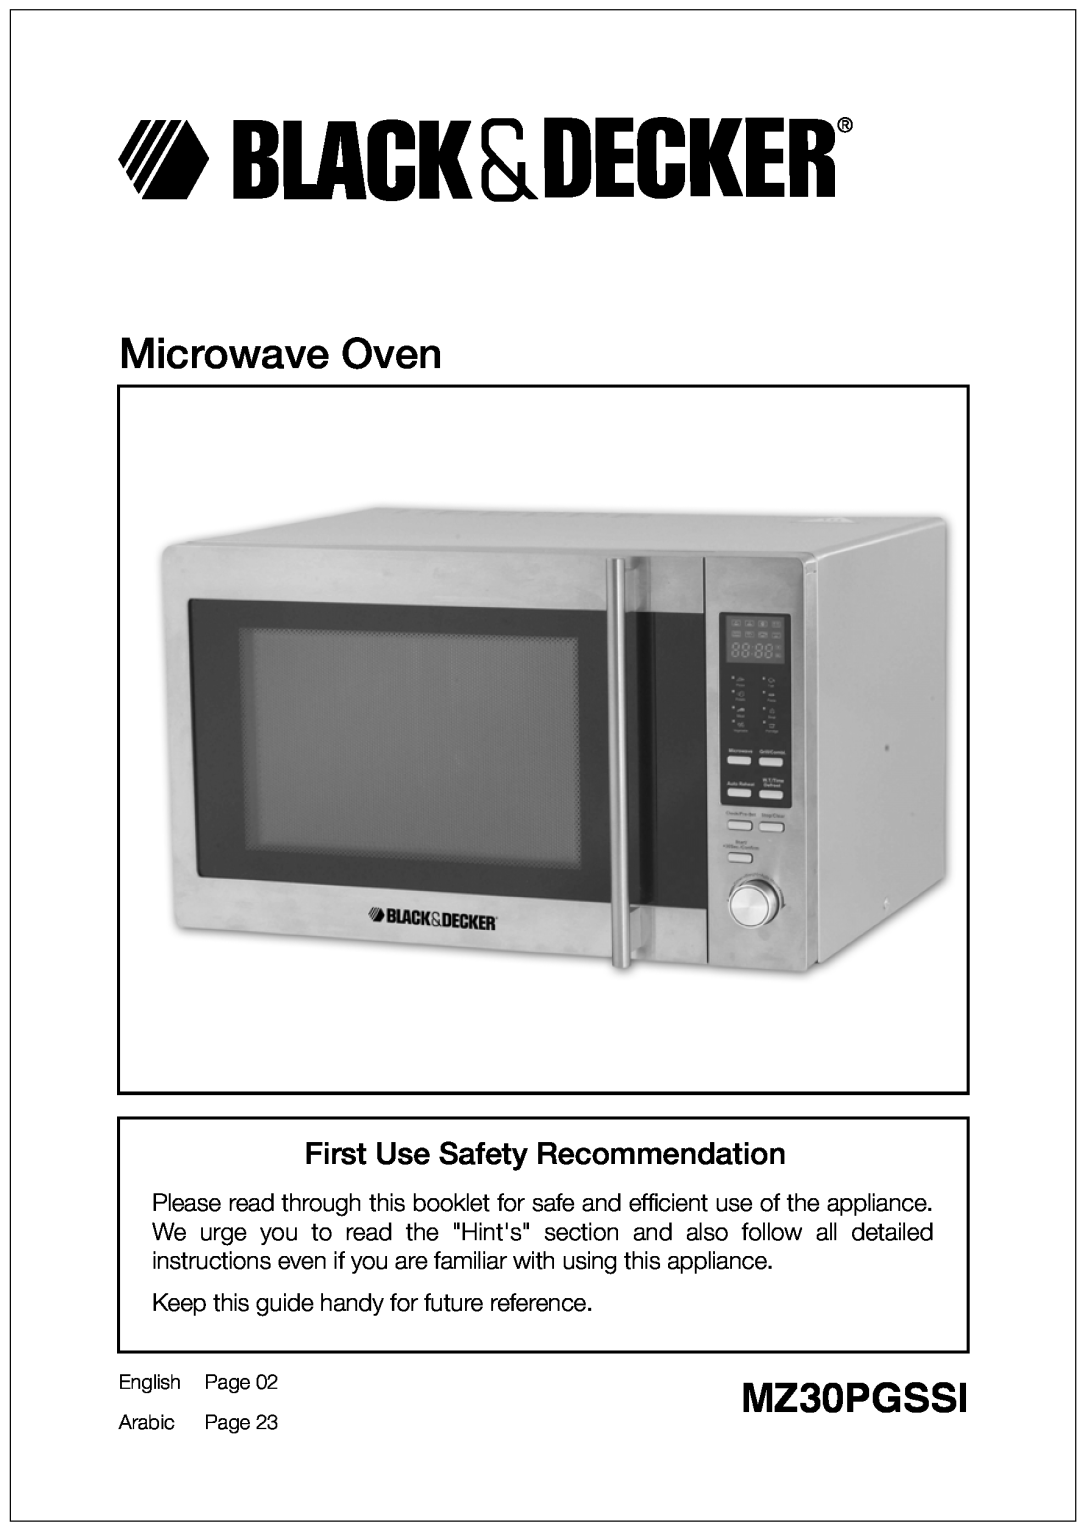 Black & Decker MZ30PGSSI manual Microwave Oven, First Use Safety Recommendation 